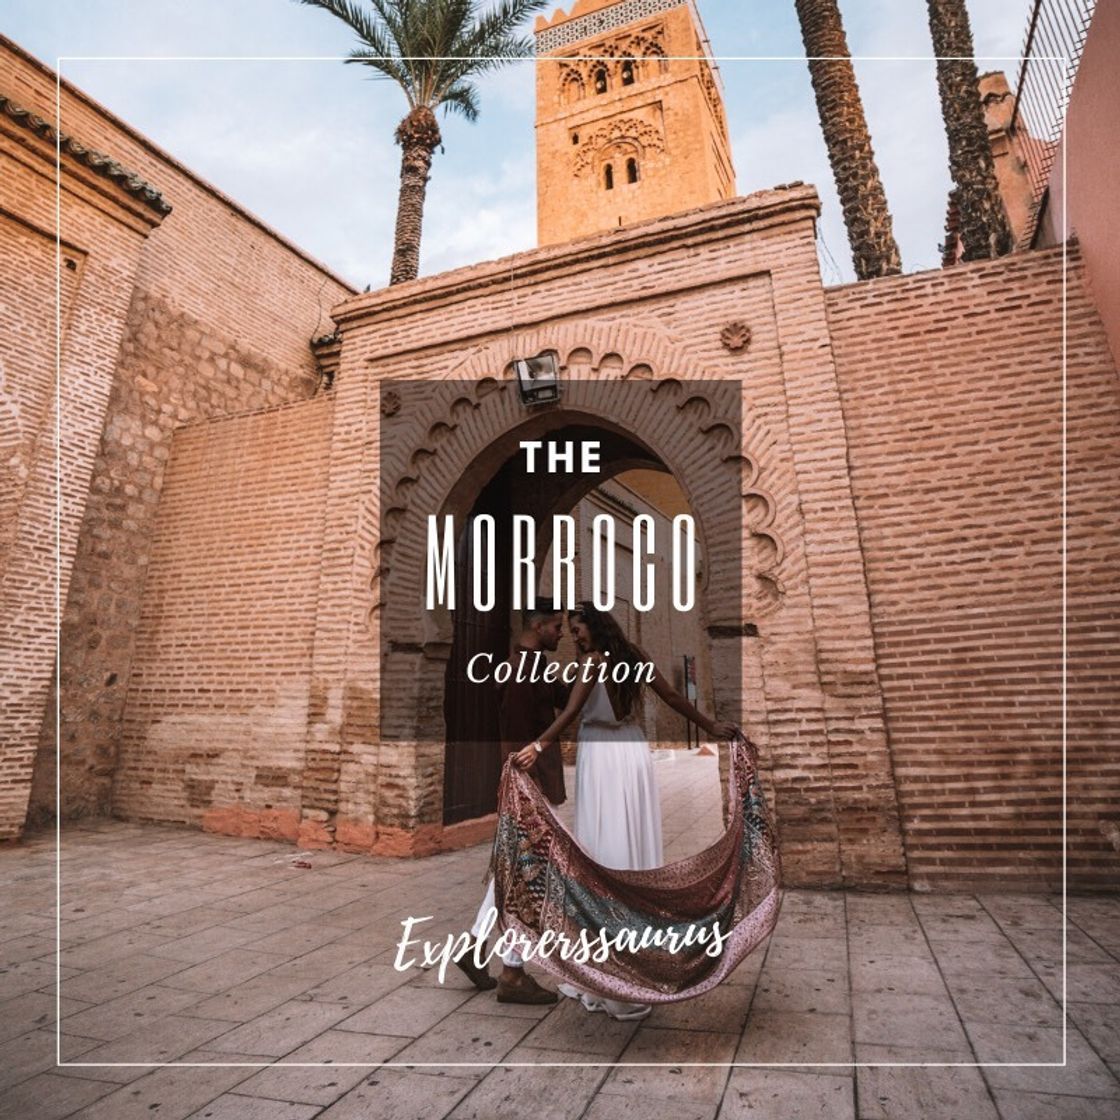 The Morocco Collection